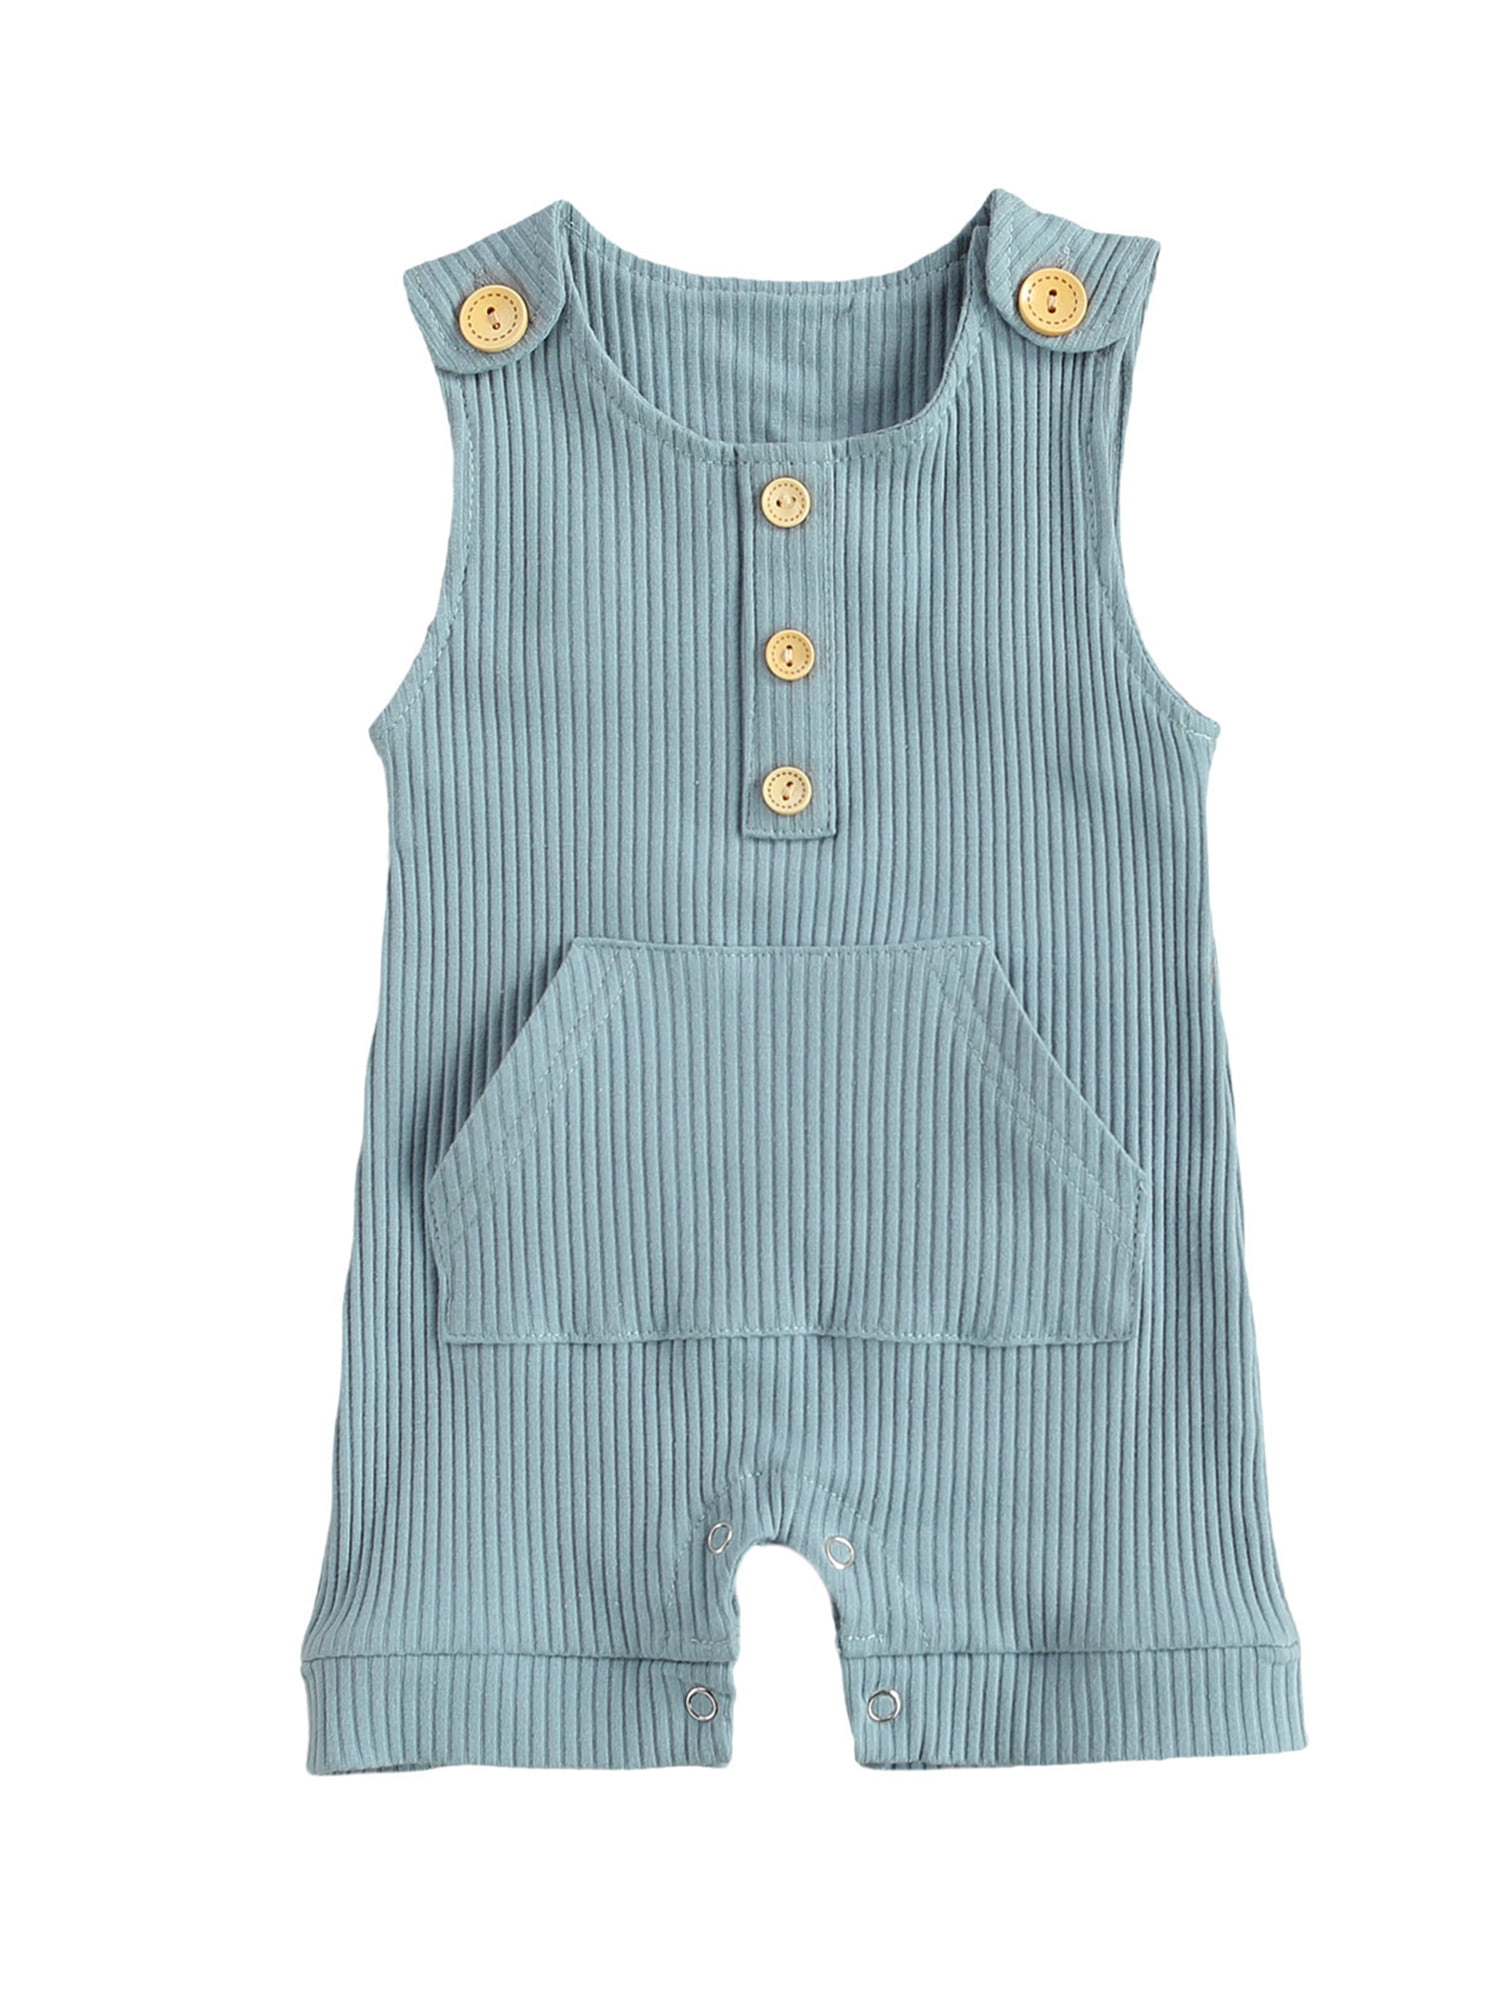 Seyurigaoka One Piece Outfits Baby Grey Striped Rompers with Button Kids Sleeveless Playsuit Jumpsuits Pants Cotton Clothing 